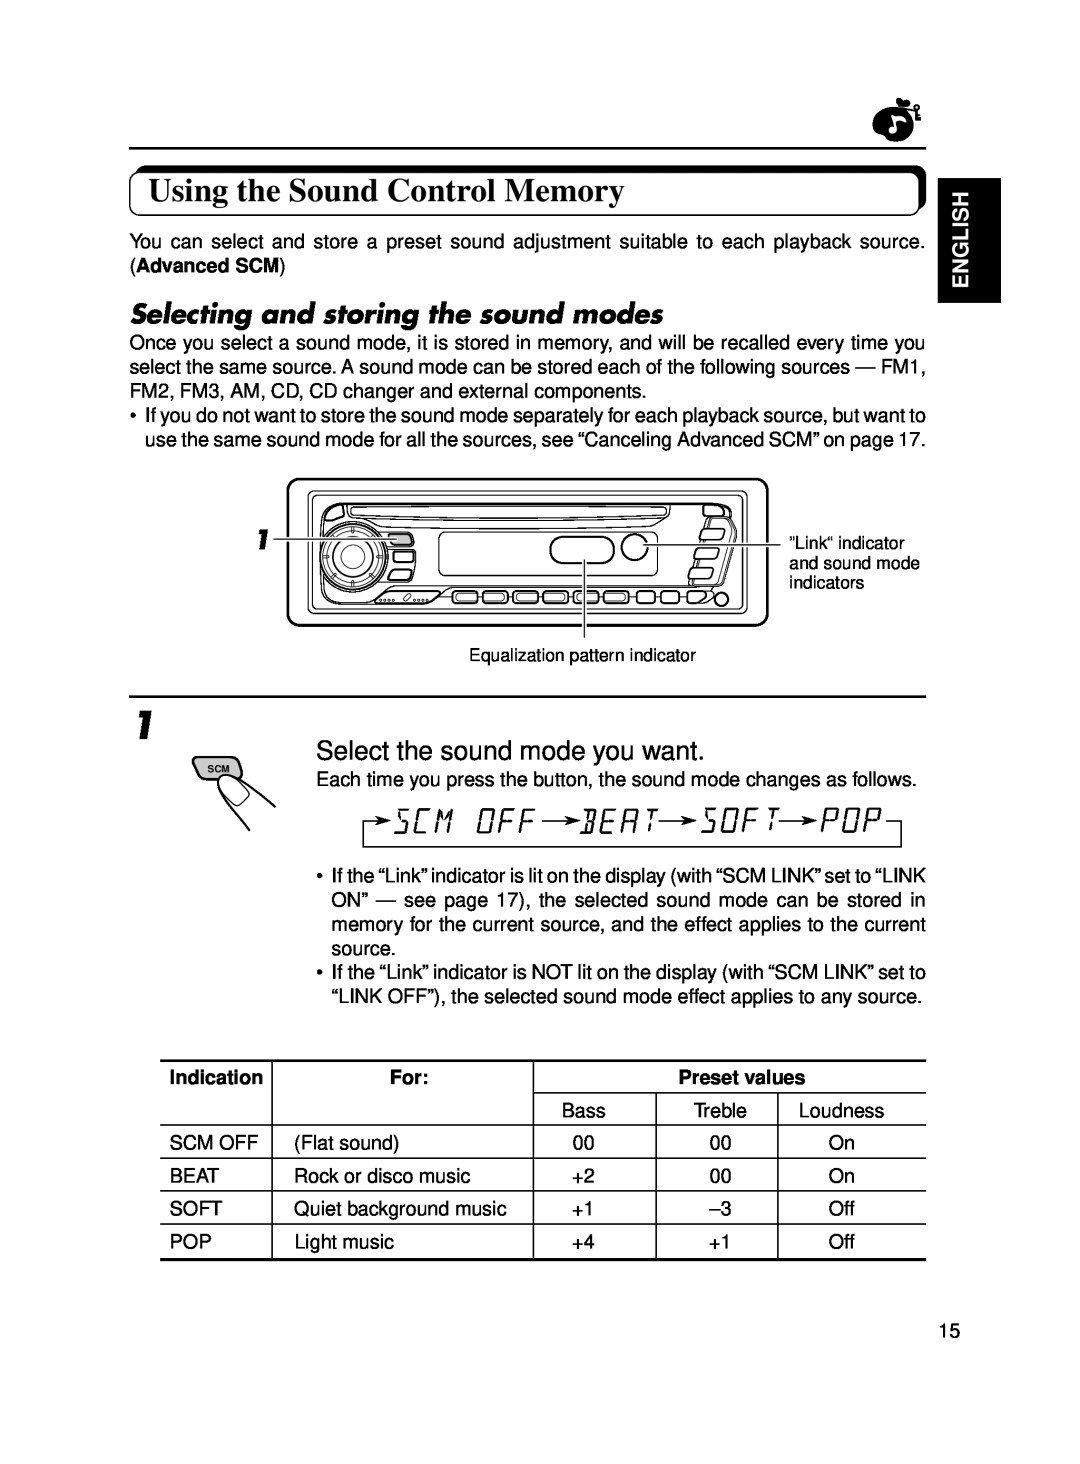 JVC KD-SX650 manual Using the Sound Control Memory, Selecting and storing the sound modes, Select the sound mode you want 